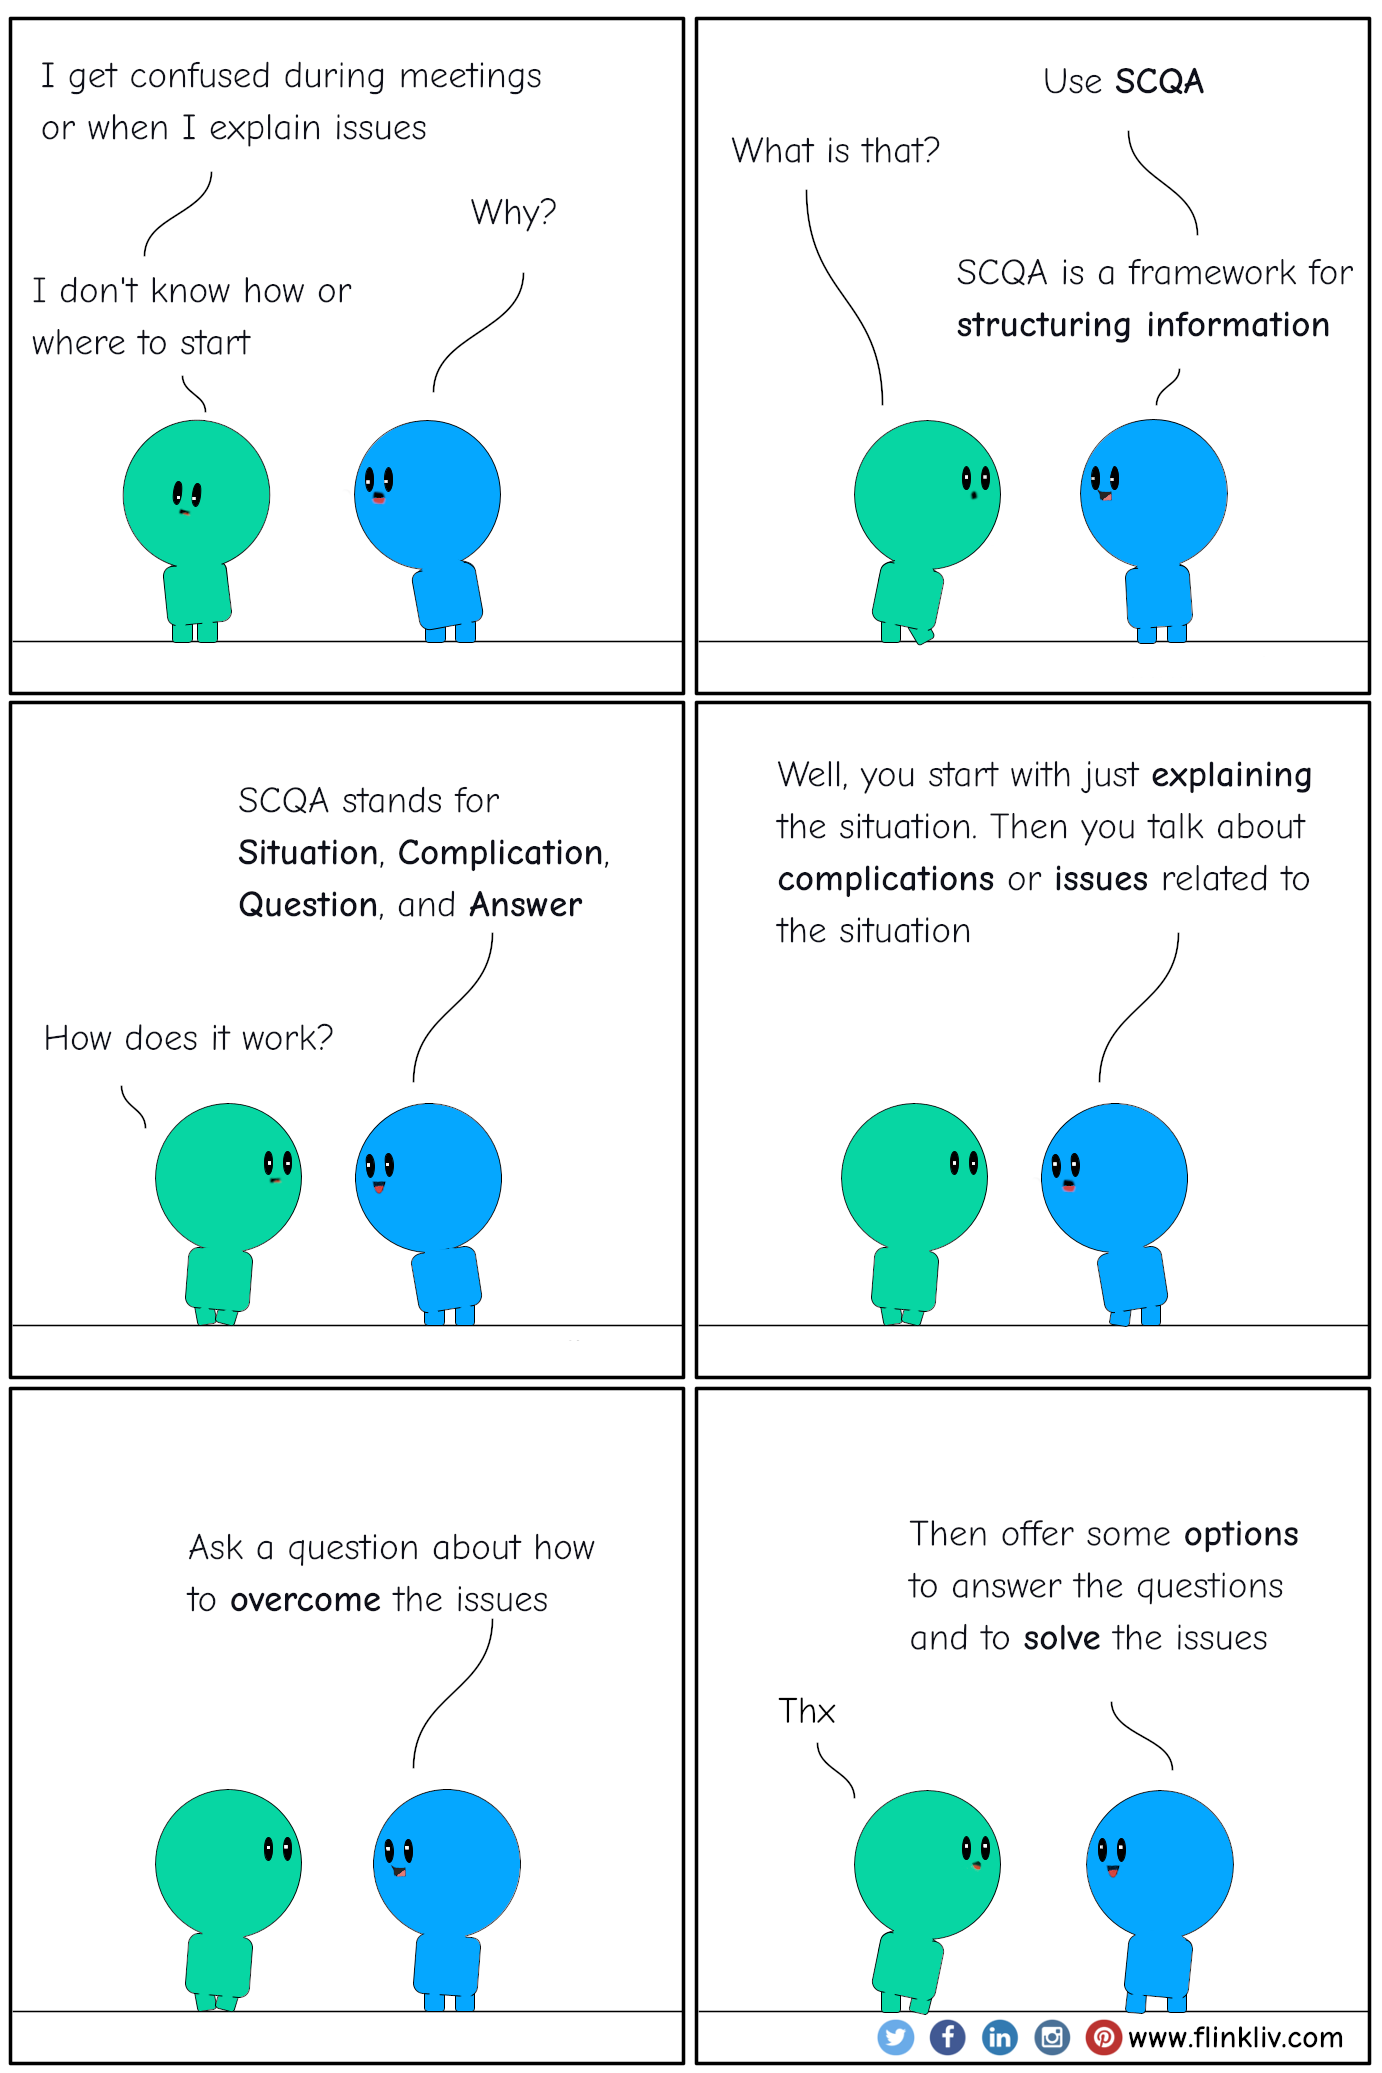 Conversation between A and B about SCQA. A: I get confused during meetings or when I explain issues B: Why? A: I don't know how or where to start B: You can use SCQA A: What is that? B: SCQA is a framework for structuring information B: SCQA stands for Situation, Complication, Question, and Answer A: How does it work? B: Well, you start with just explaining the situation. Then you talk about complications or issues related to the situation B: Ask a question about how to overcome the issues B: Then offer some options to answer the questions and to solve the issues A: Waw, thx By flinkliv.com